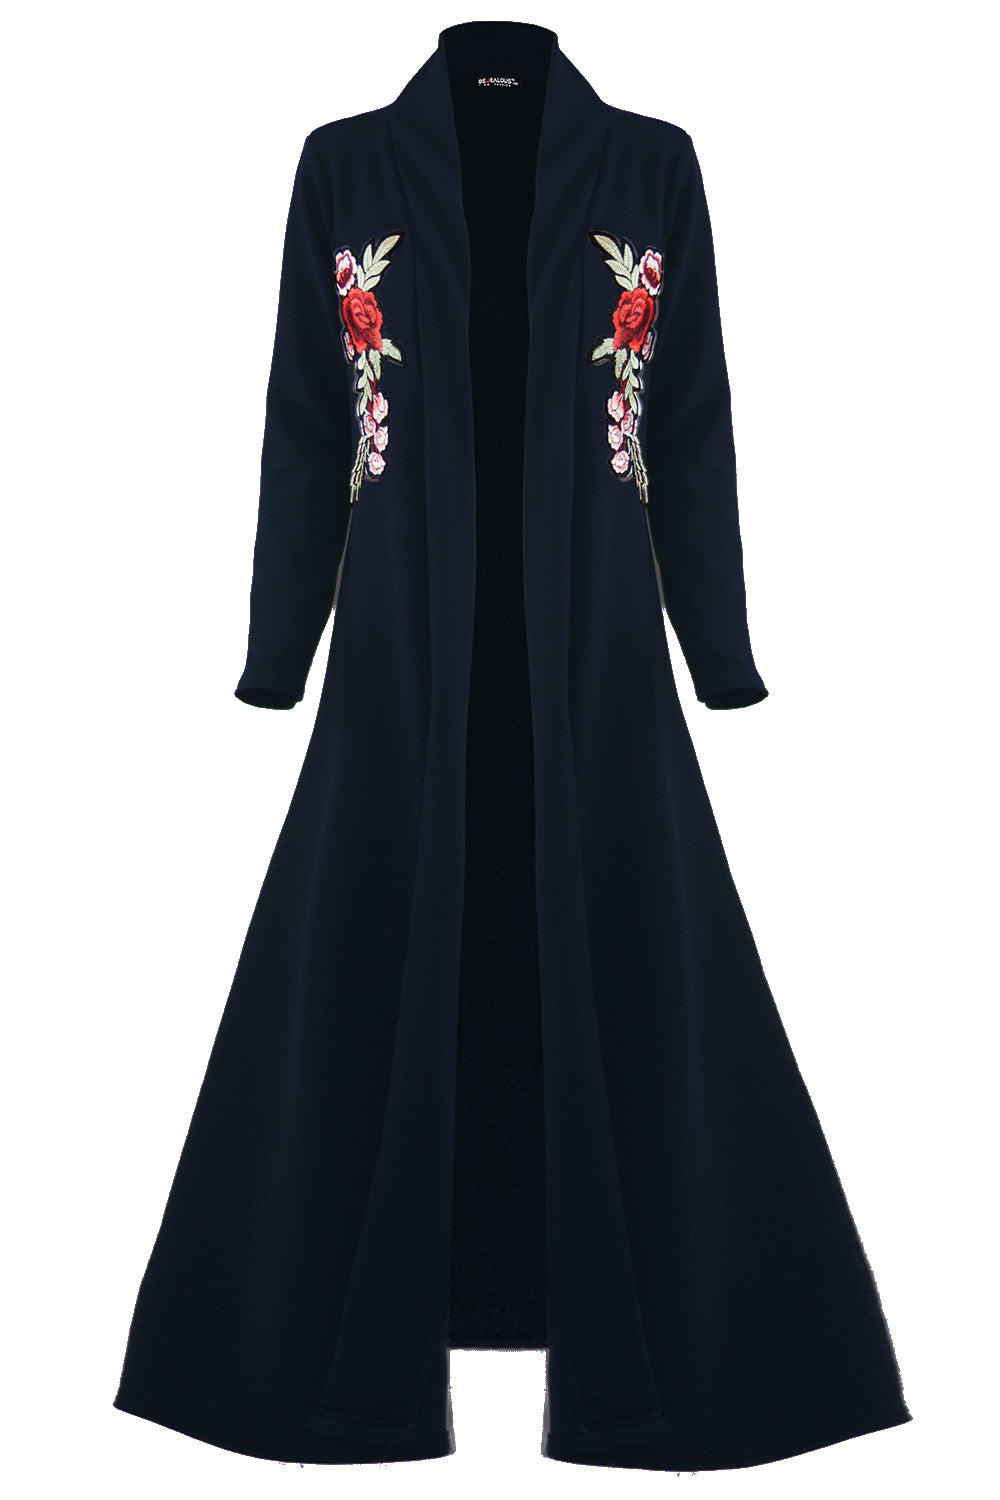 Paris Long Sleeve Floral Embroidered Maxi Jacket